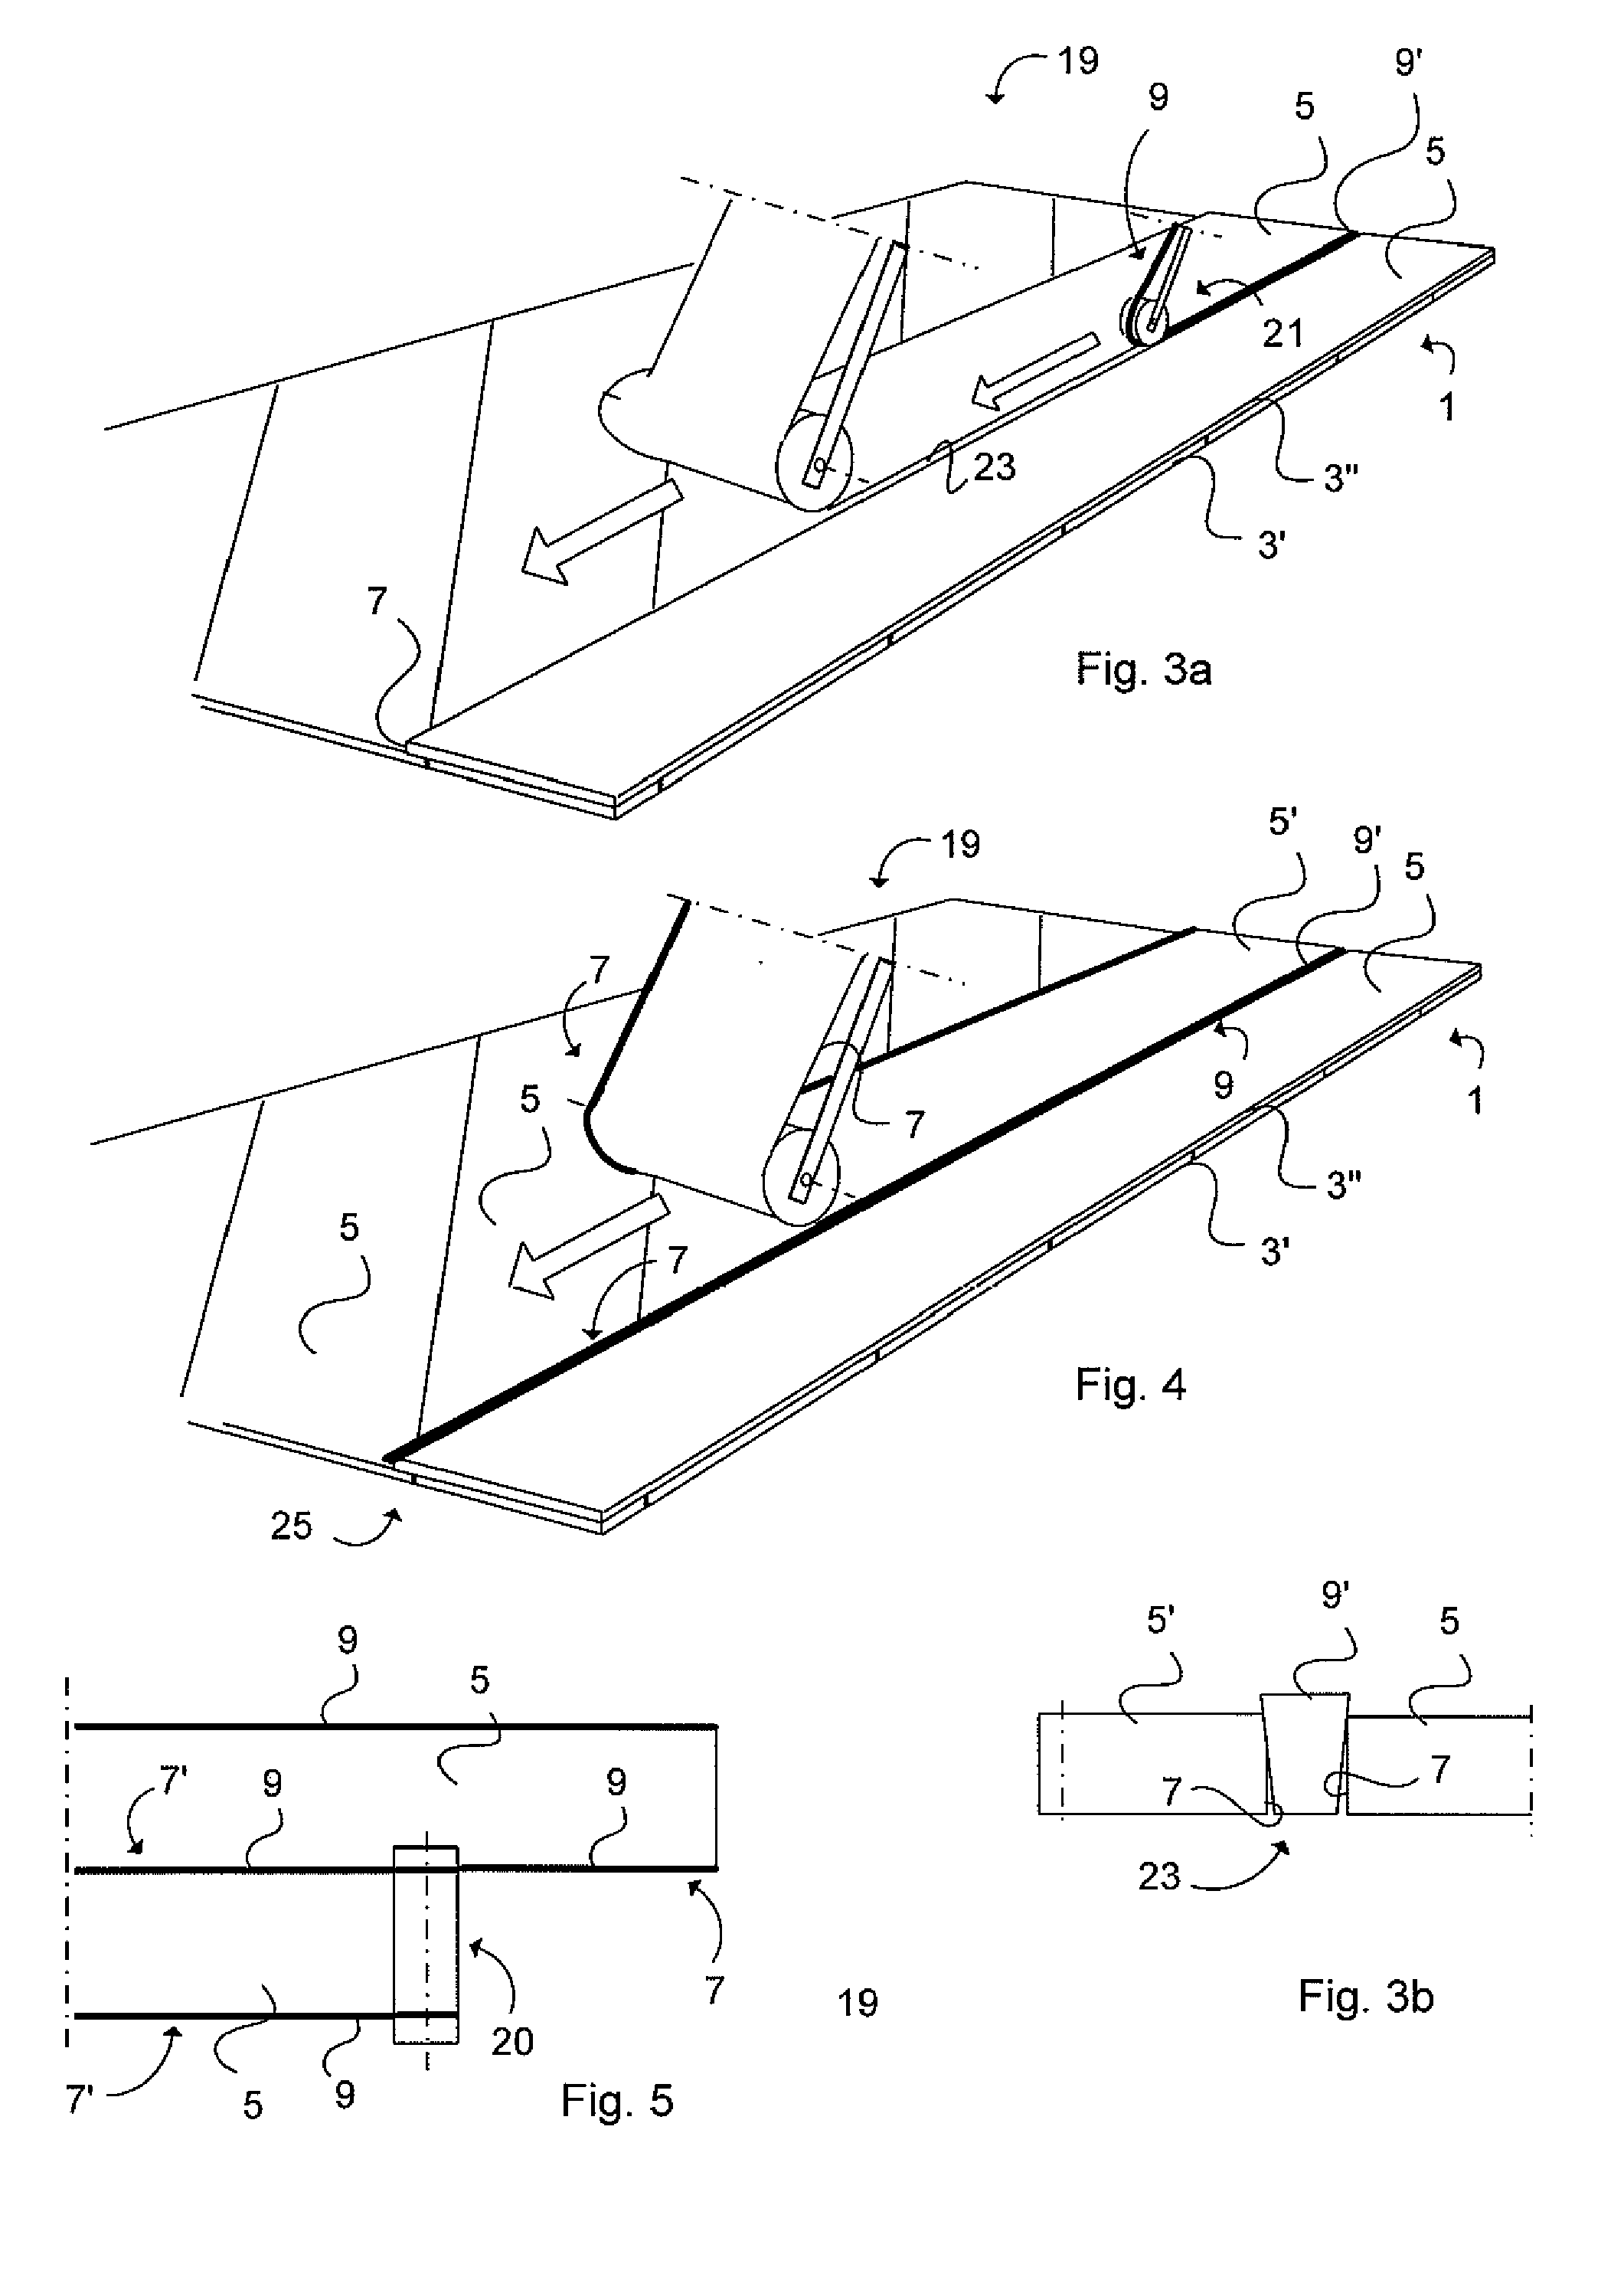 Structural longitudinal composite joint for aircraft structure